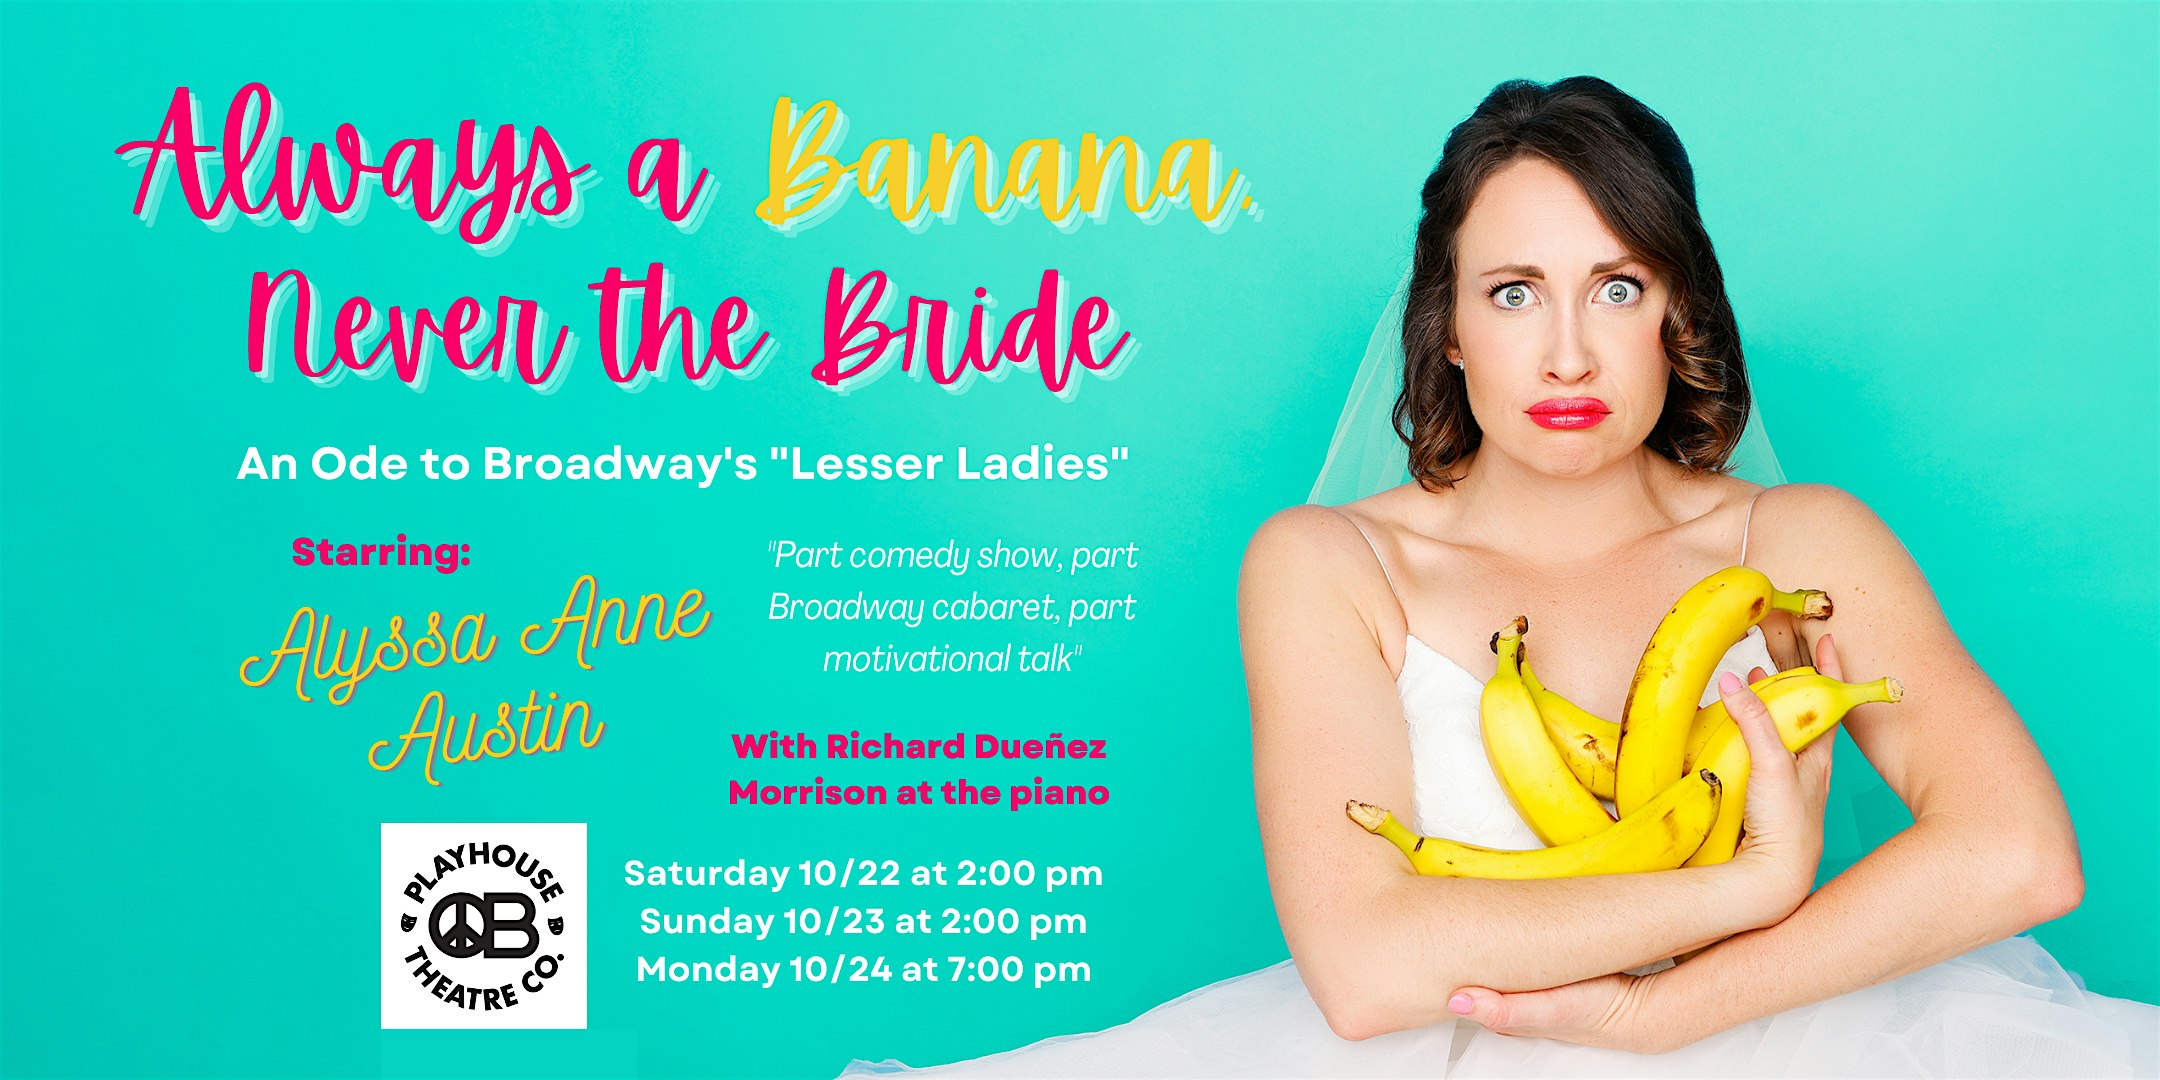 Always a Banana, Never the Bride: An Ode to Broadway\u2019s "Lesser Ladies"